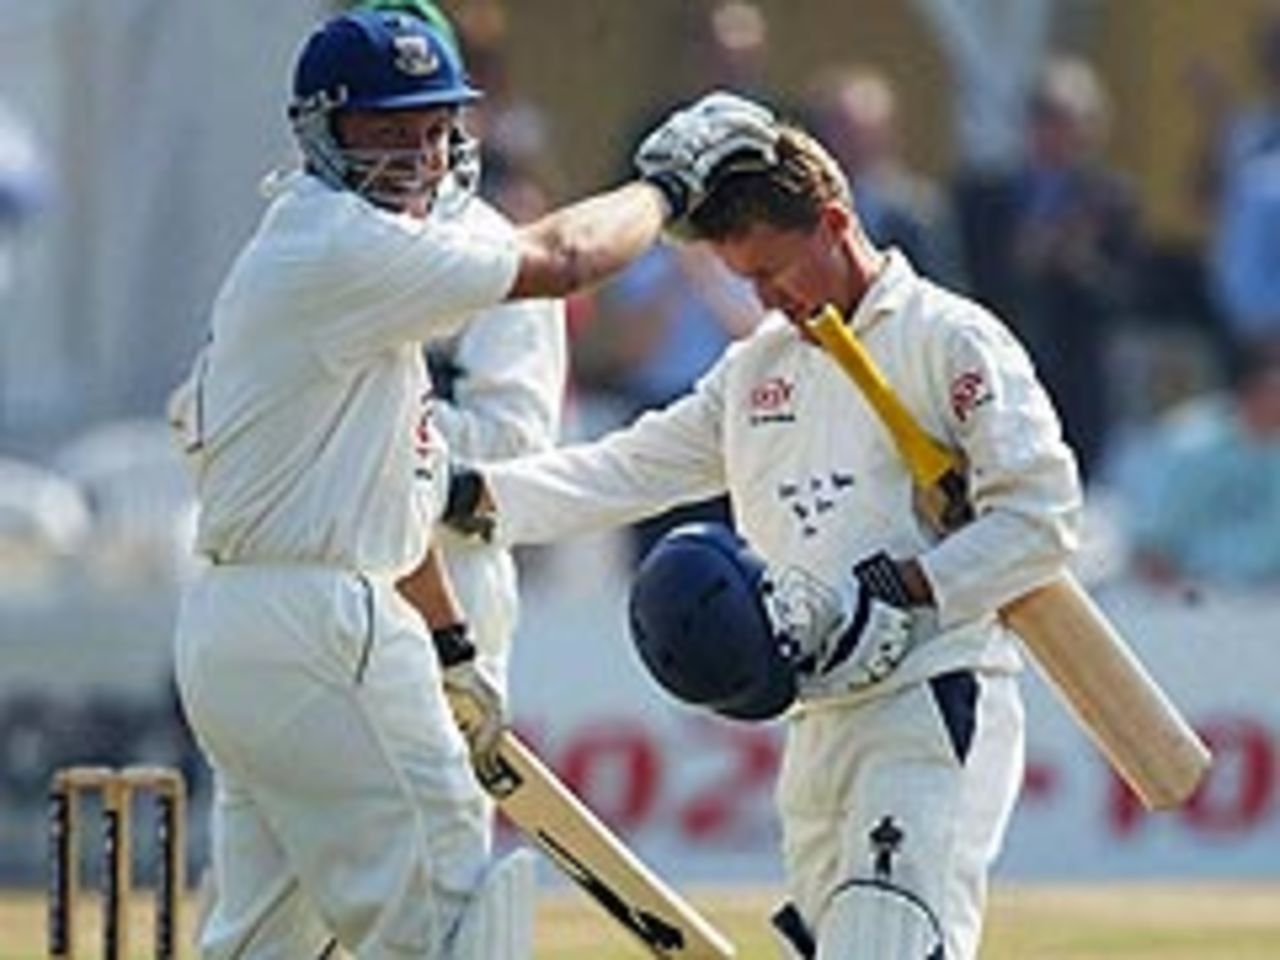 Chris Adams congratulates Murray Goodwin, as Sussex finally secure the first Championship title in their 164-year history. Both men made centuries, with Goodwin closing in on 300